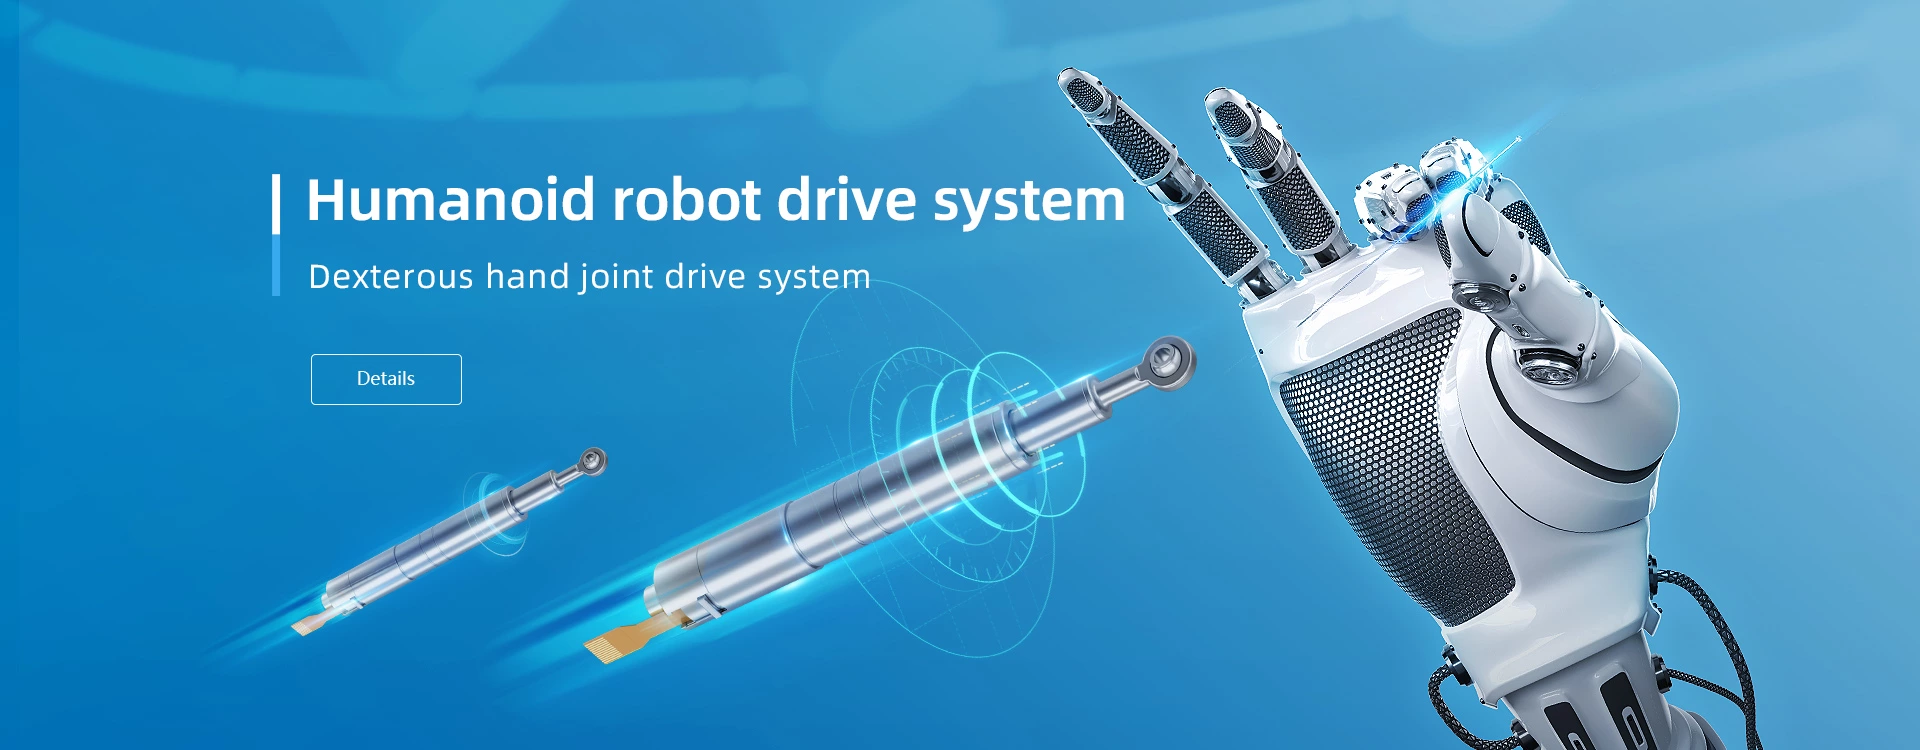 Robot drive system